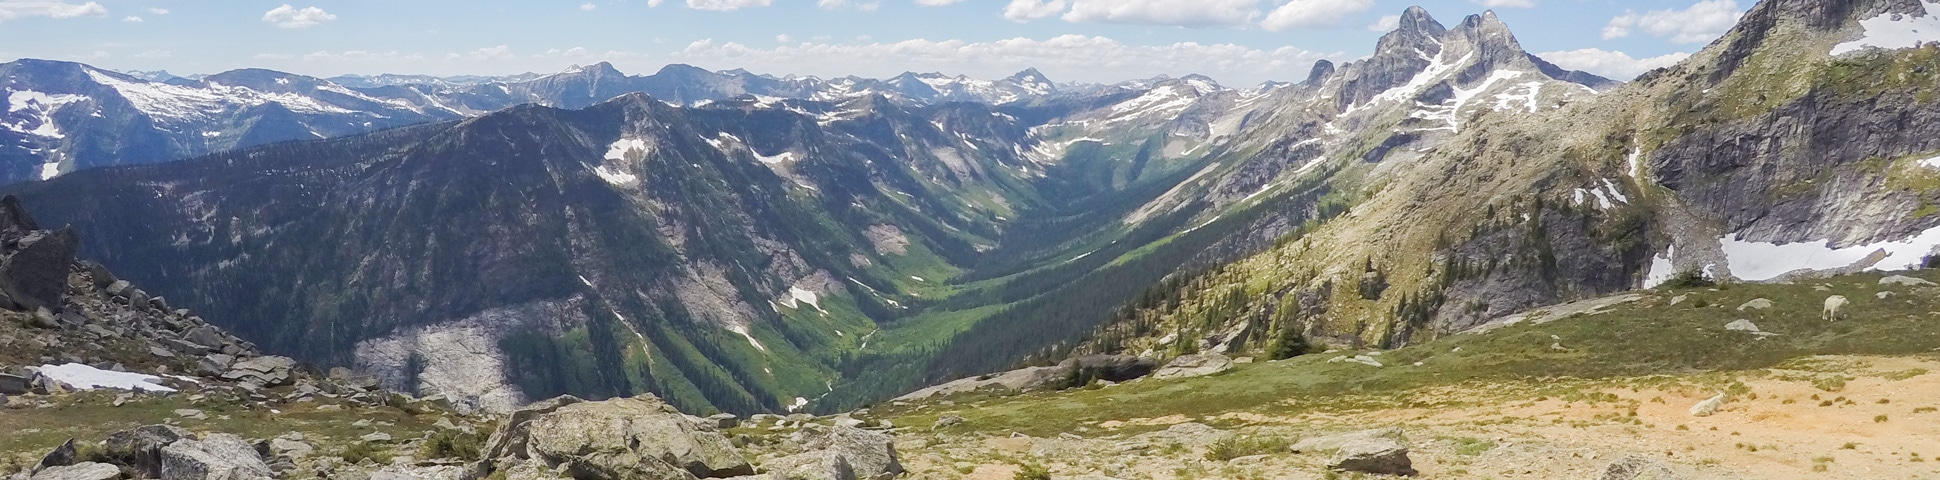 Panoramic view from a beautiful hike in West Kootenays, BC